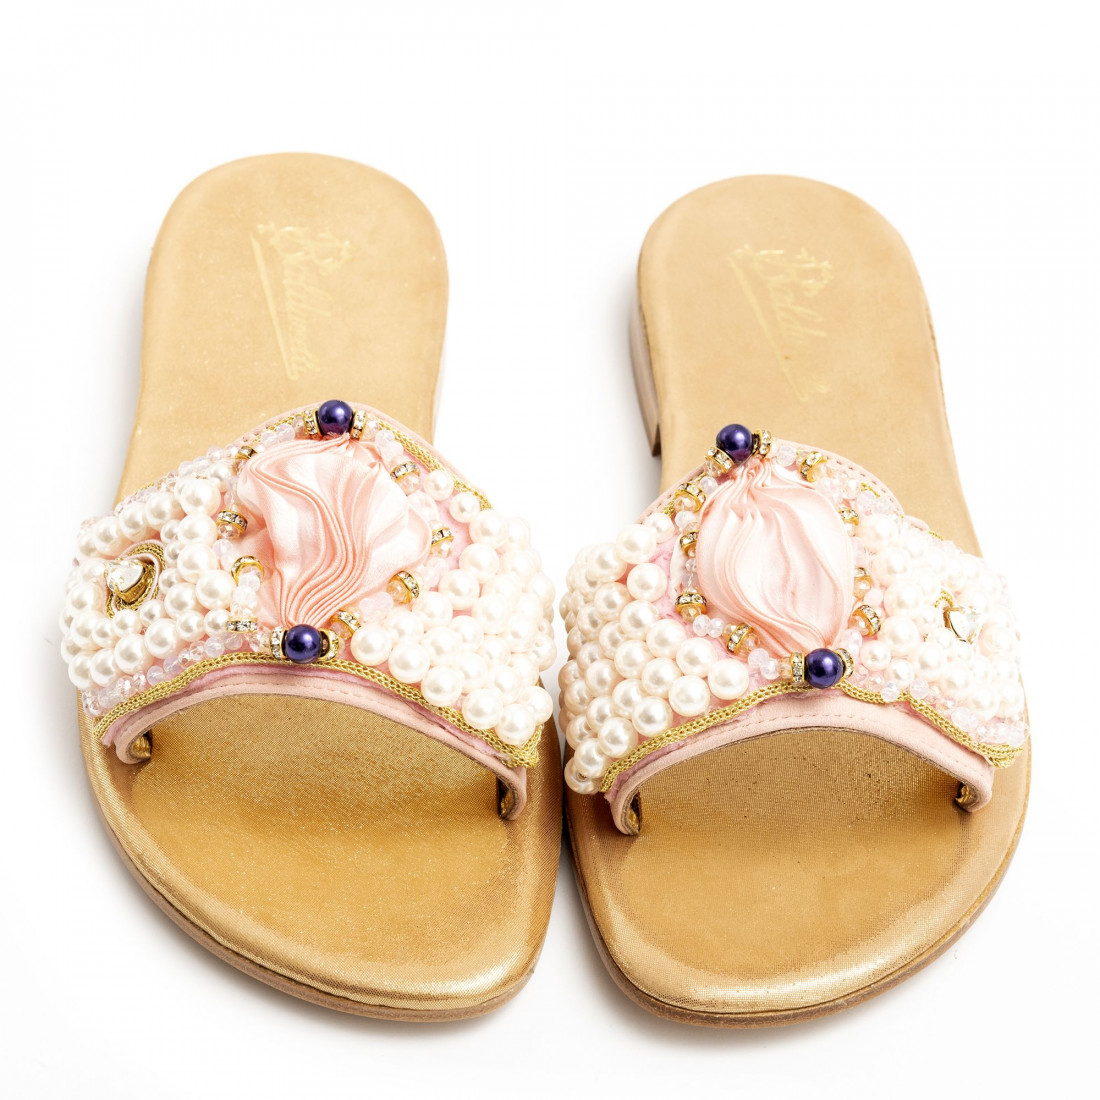 Pink Balduccelli slippers with pearls and strass